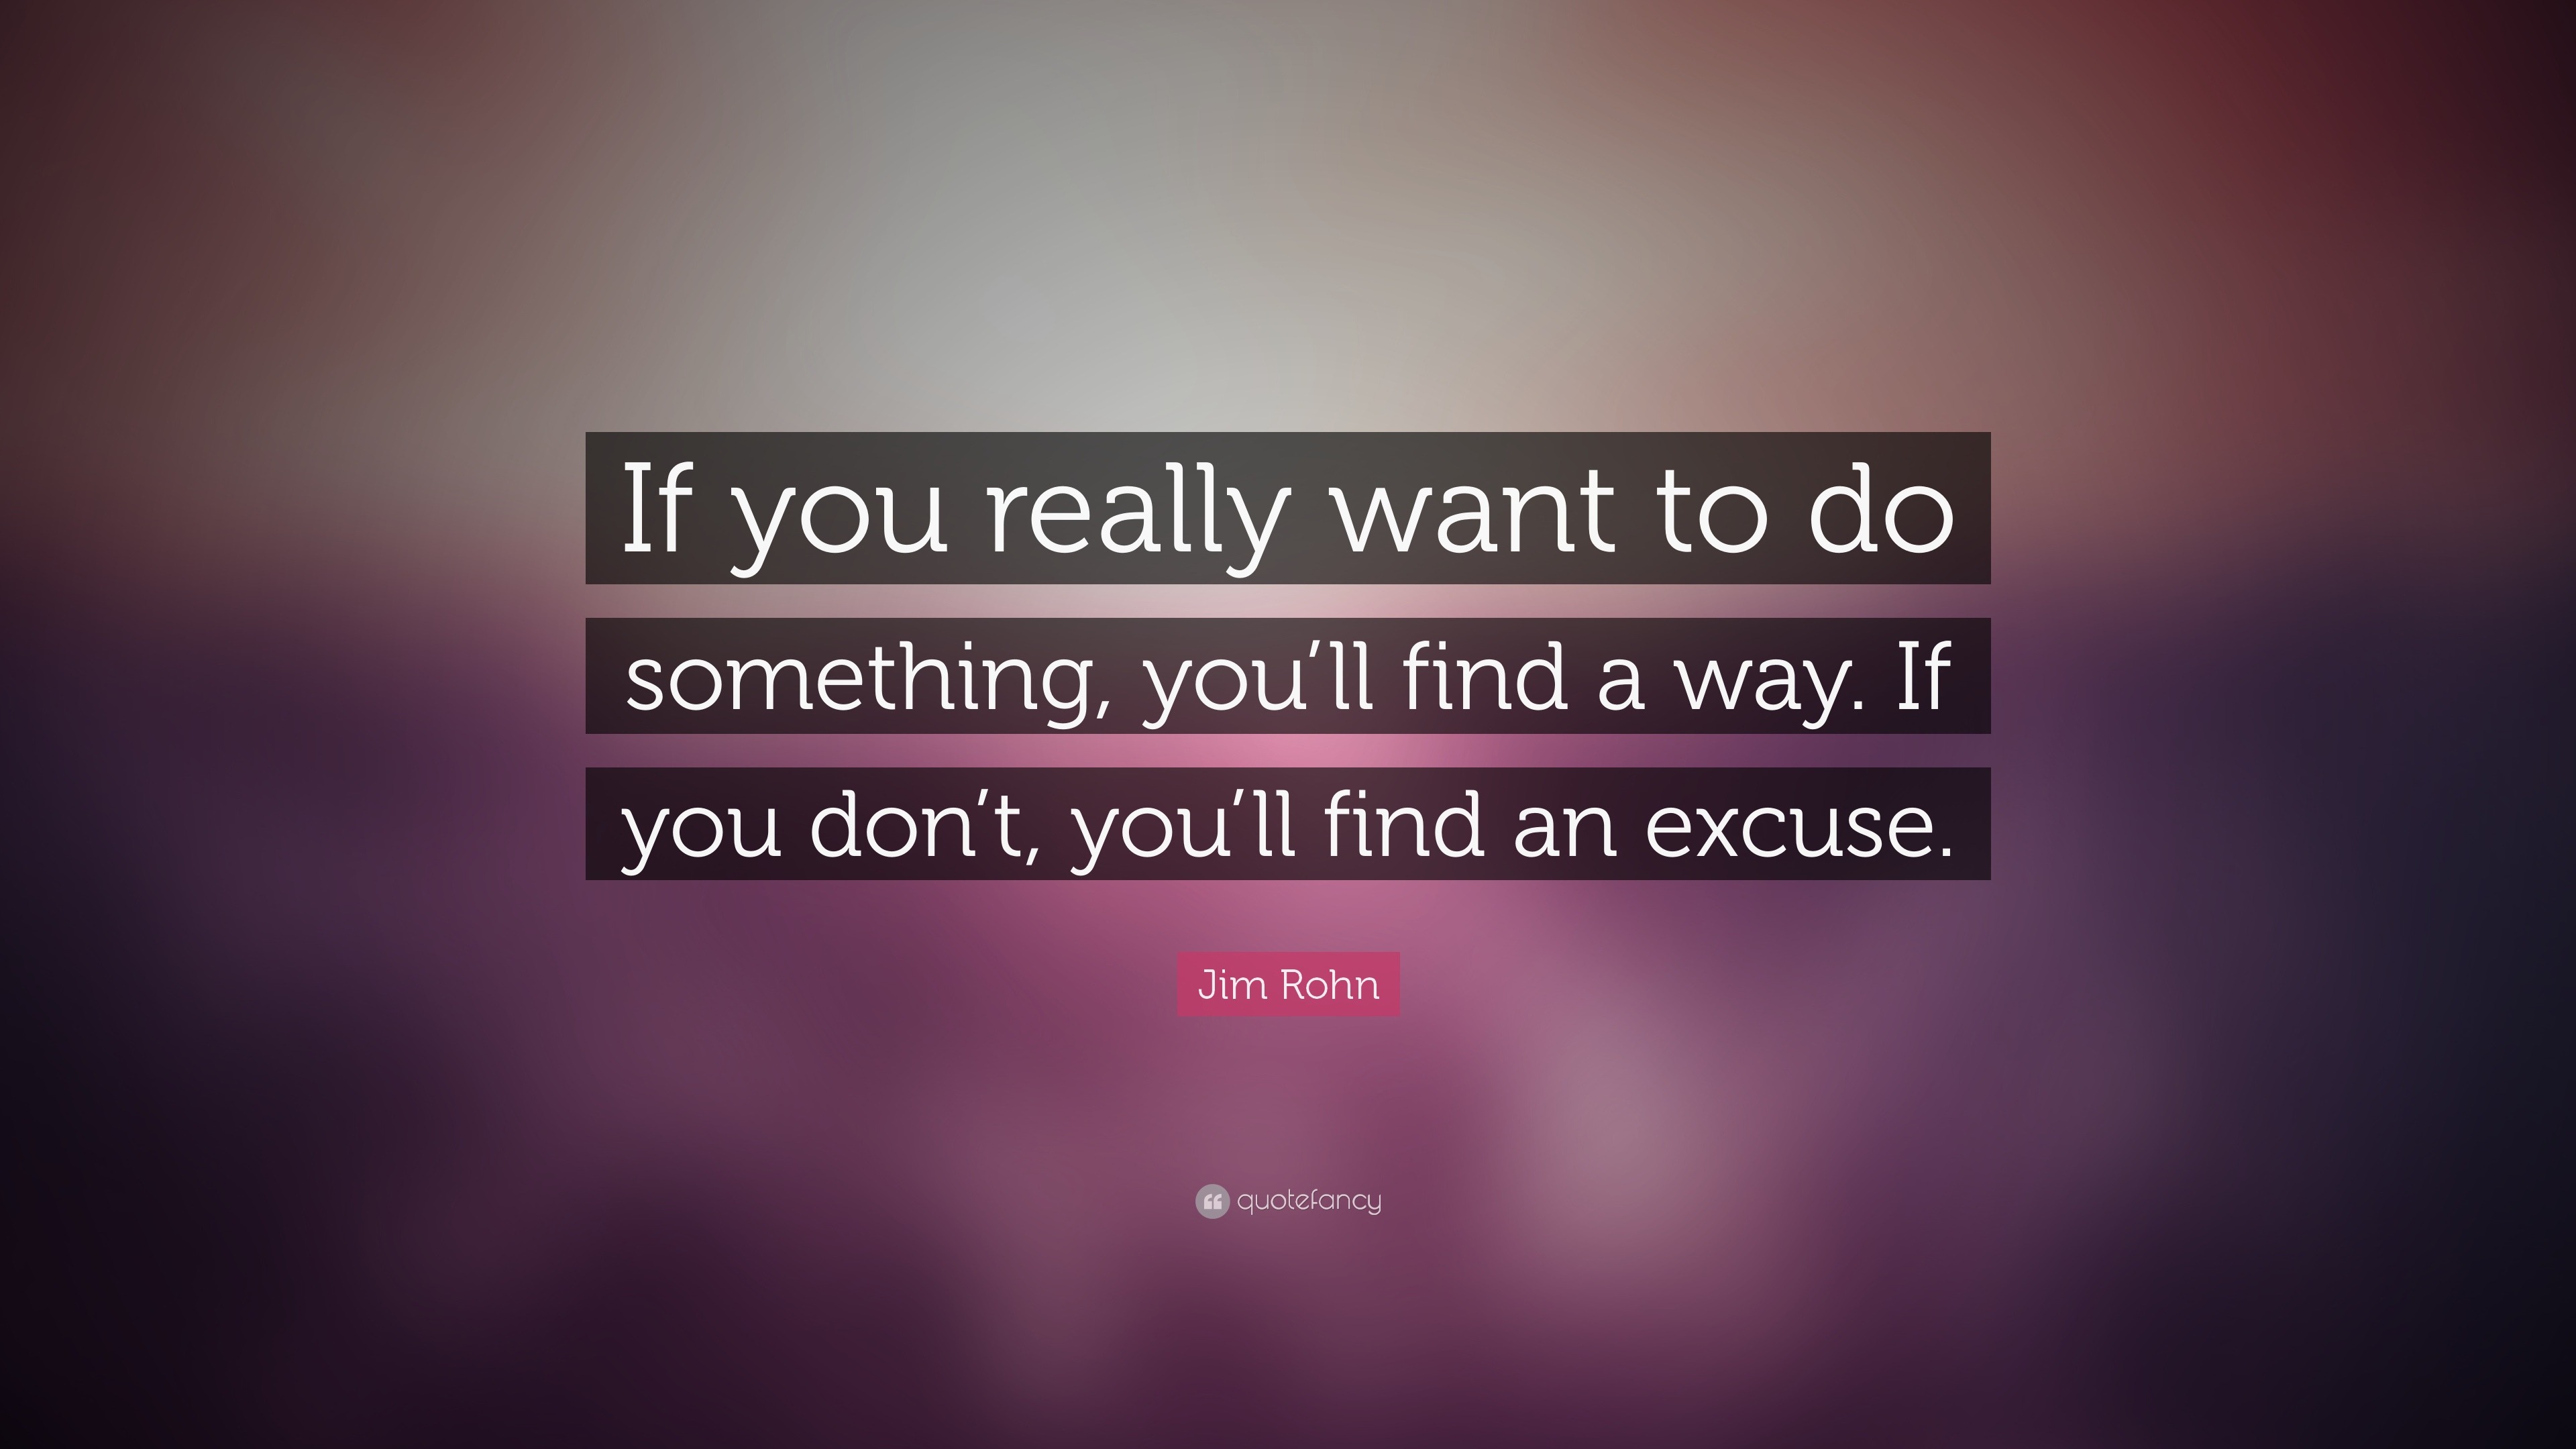 If you really want to do something, you'll